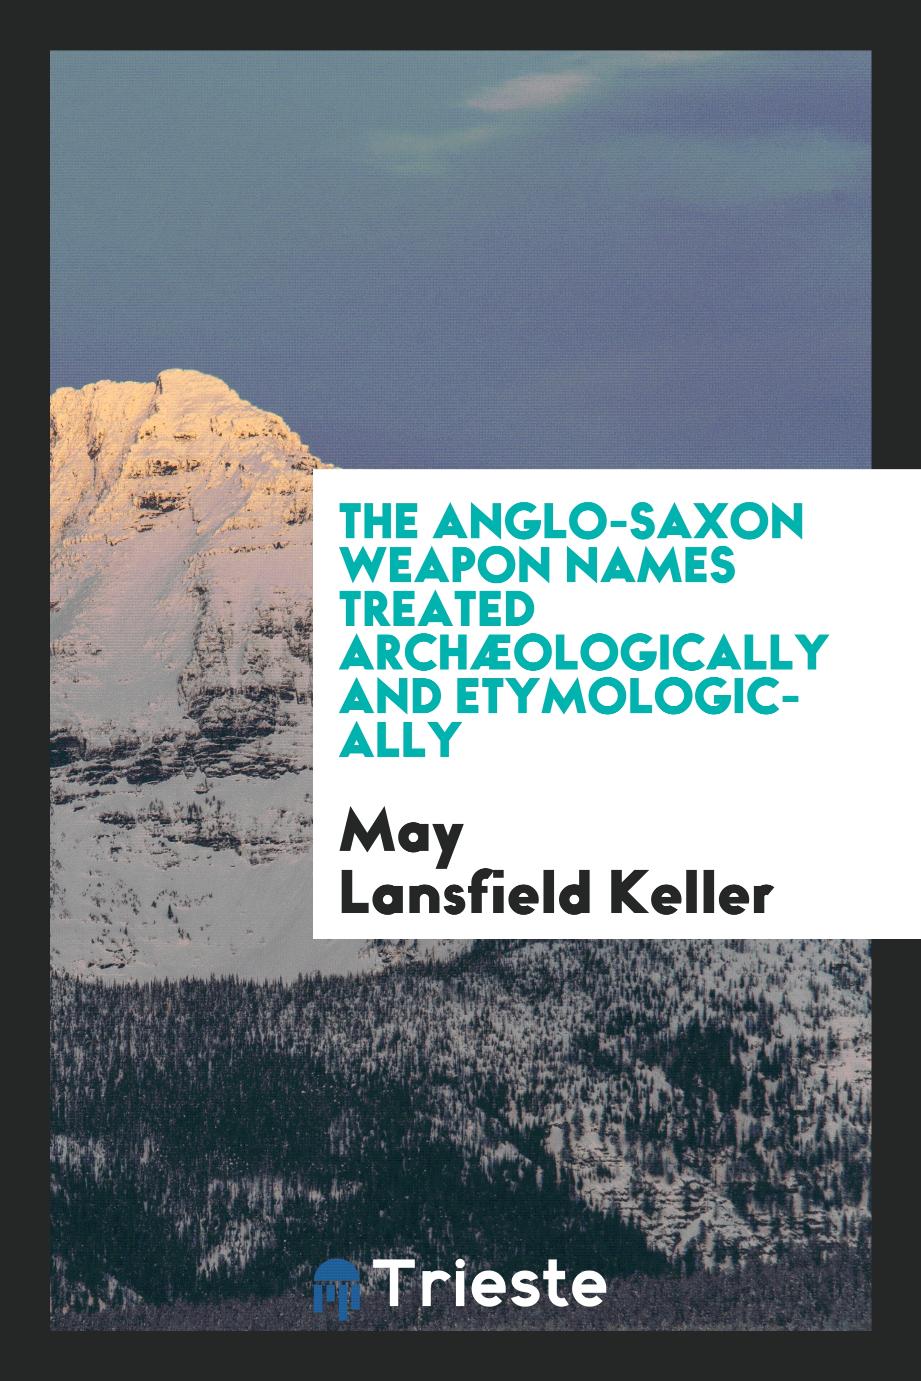 The Anglo-Saxon weapon names treated archæologically and etymologically